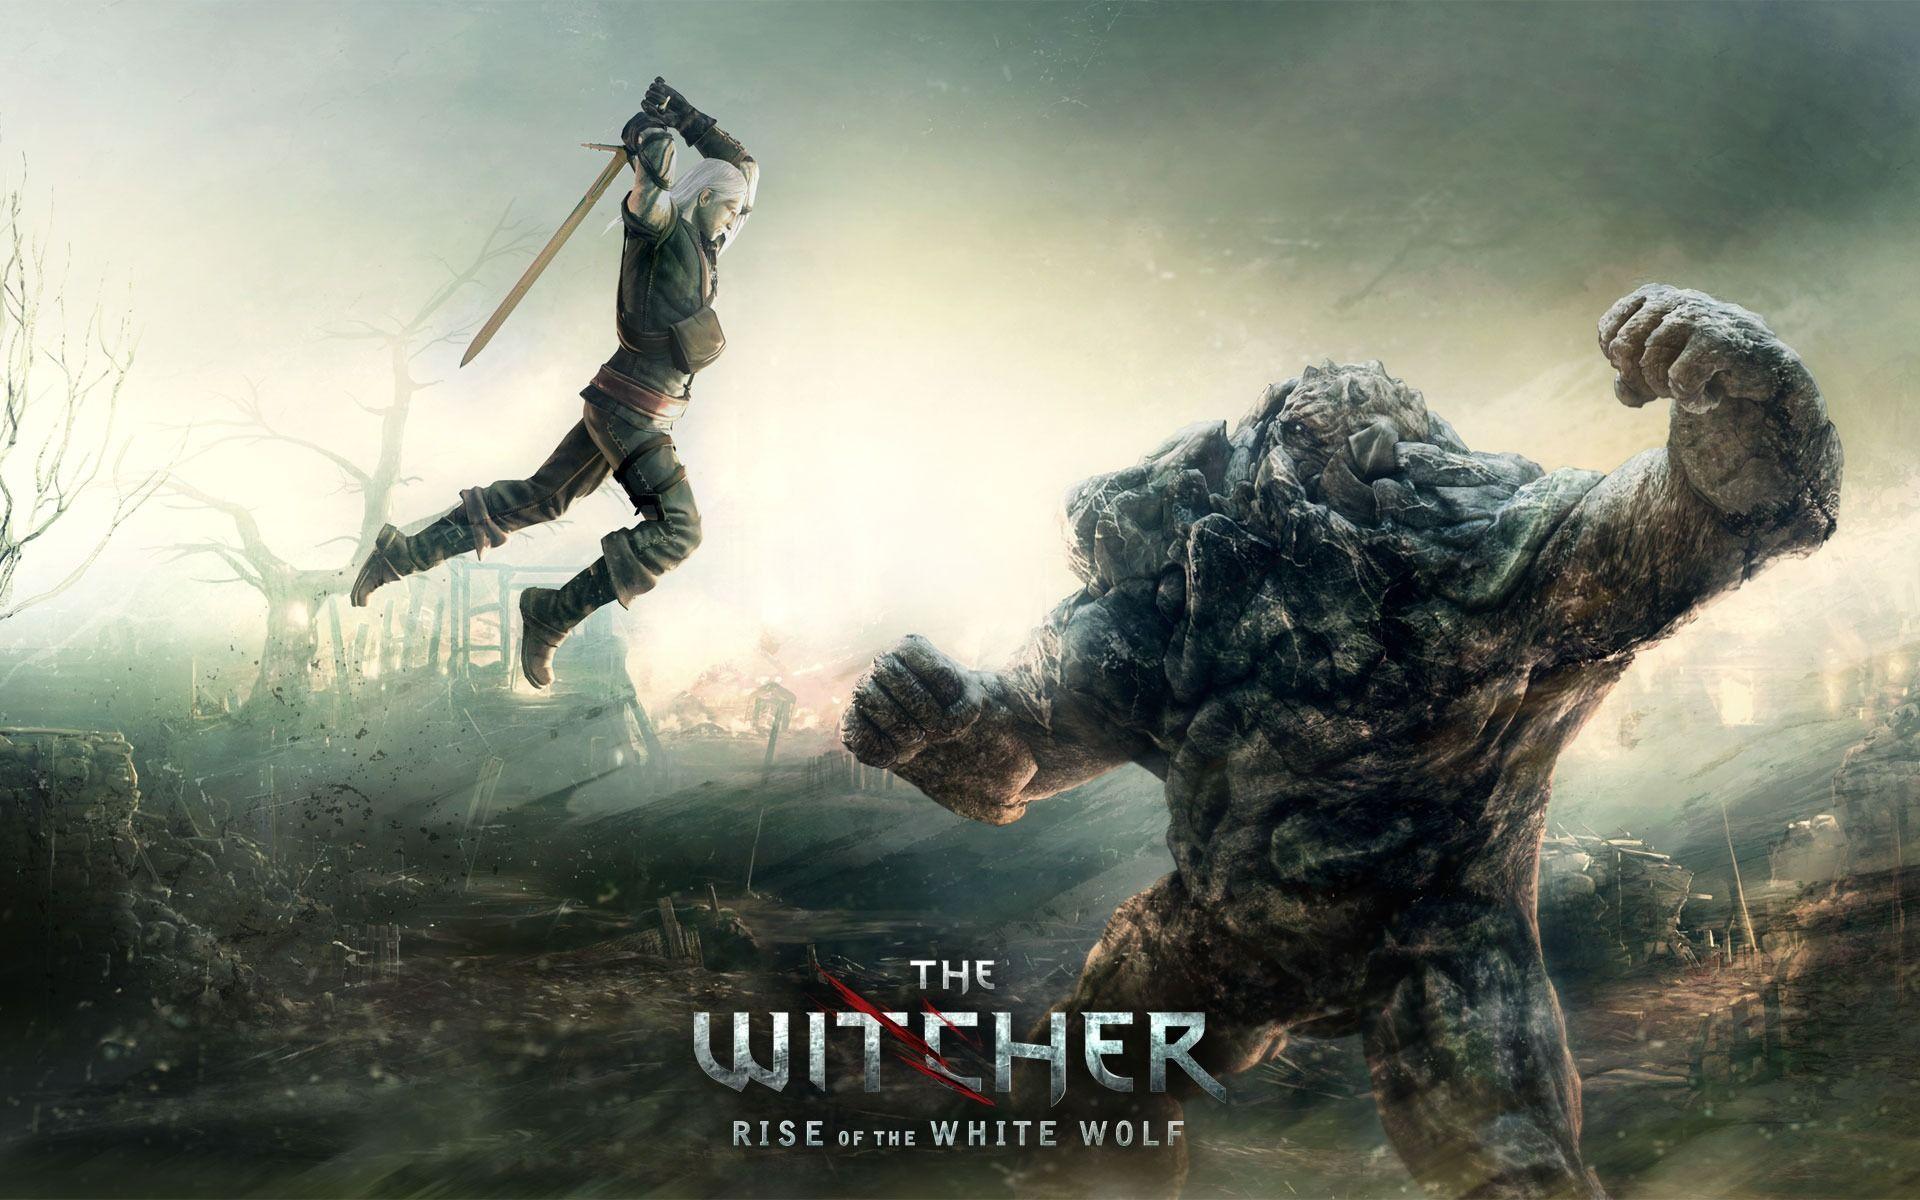 The Witcher Rise of the White Wolf Wallpaper The Witcher Games